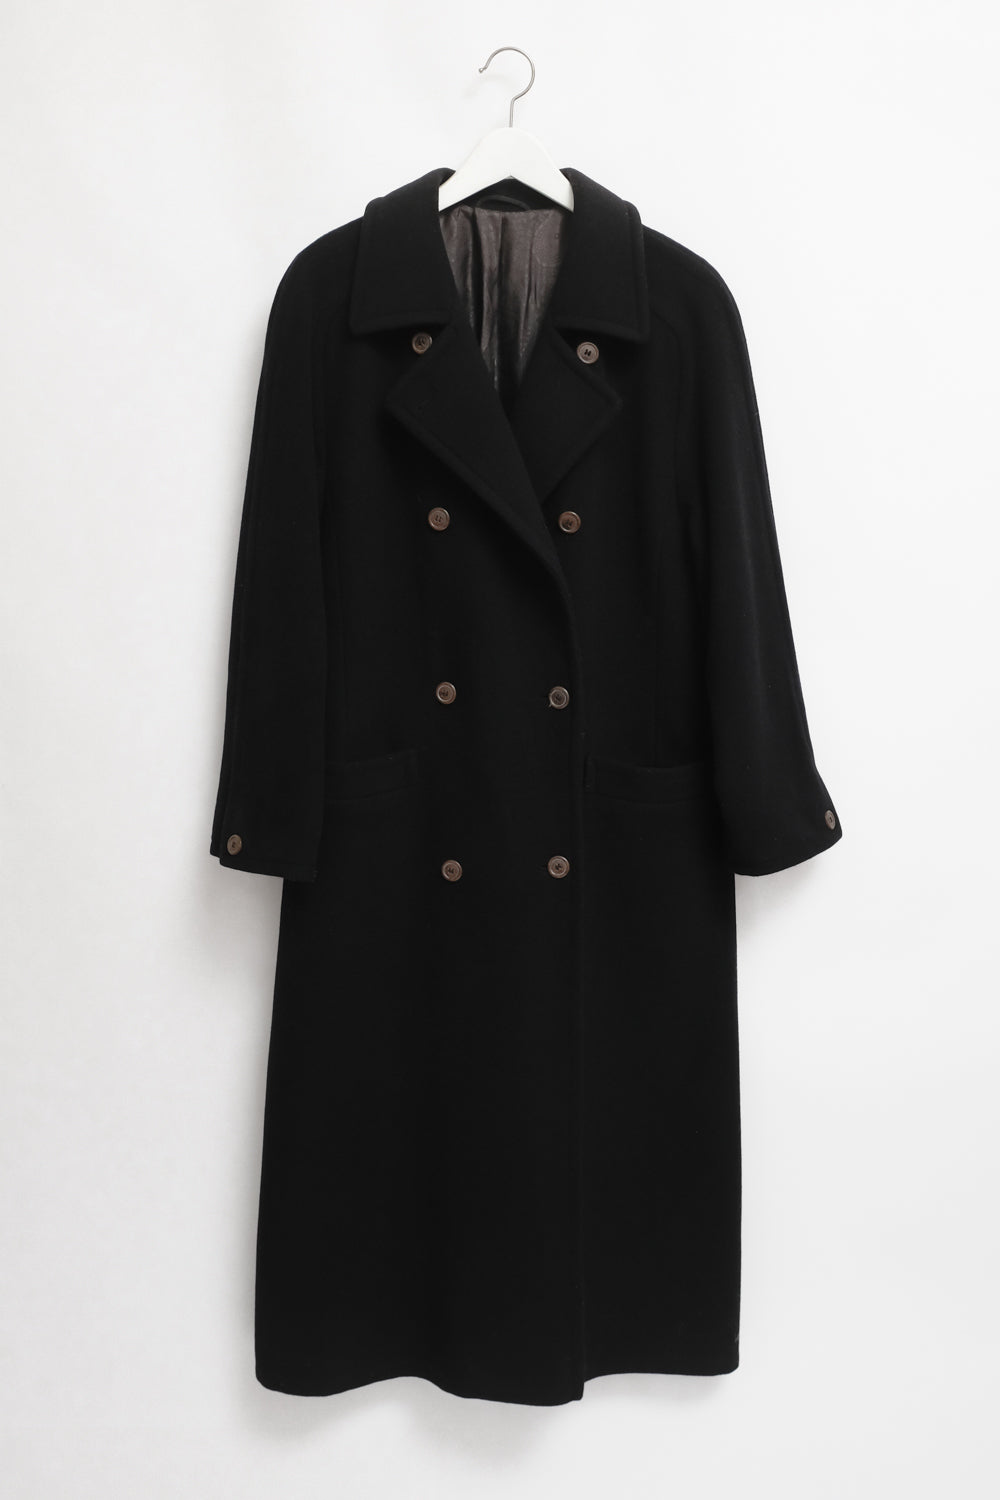 CASHMERE WOOL DOUBLE BREASTED BLACK MAXI COAT